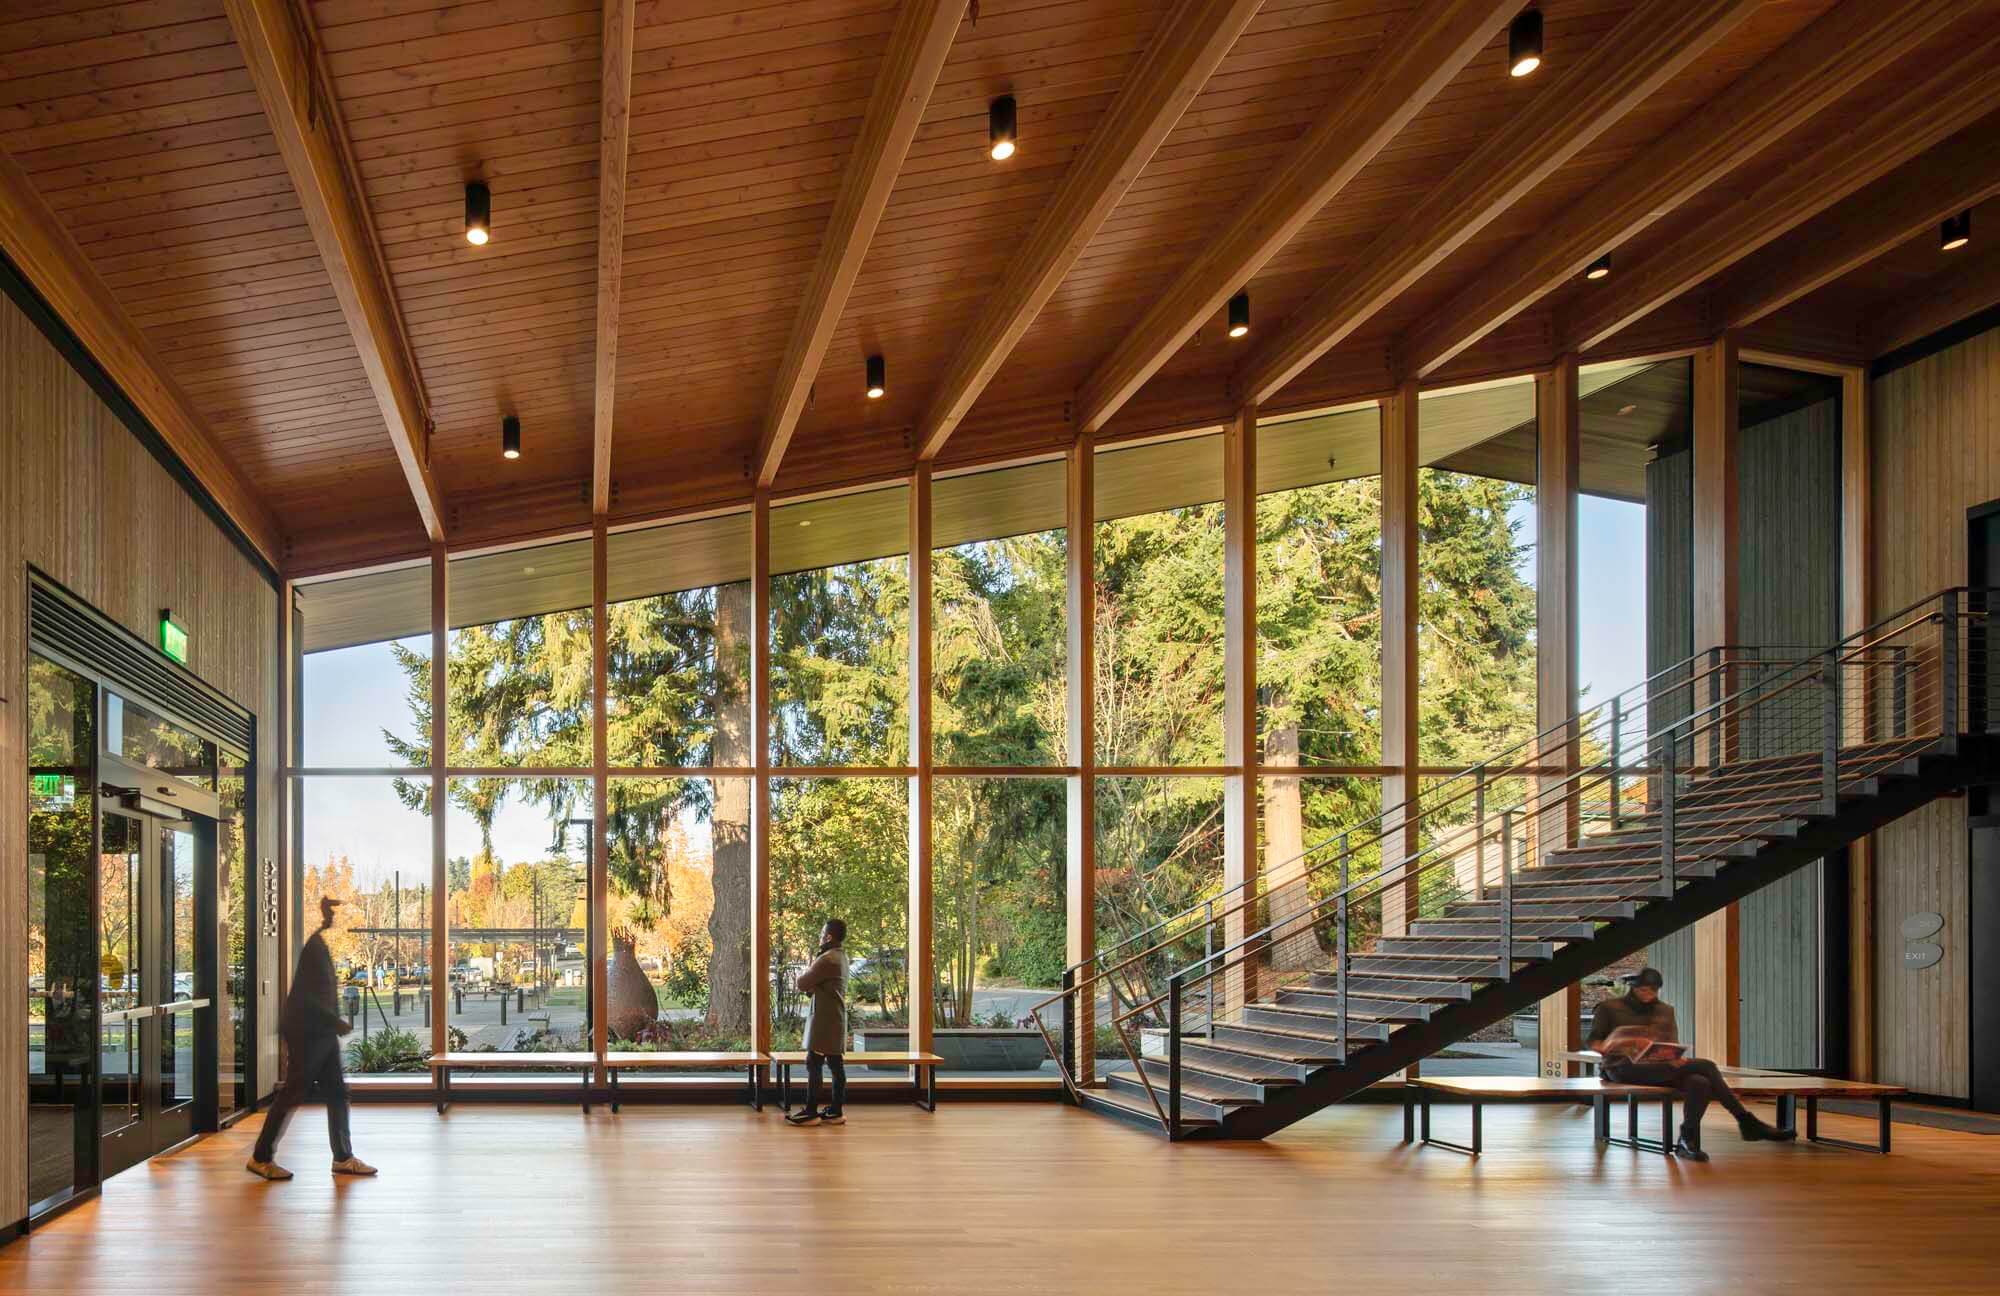 A lobby with wood and blackened steel fixtures, with a background of woodland landscape peeking from the glass curtain wall.